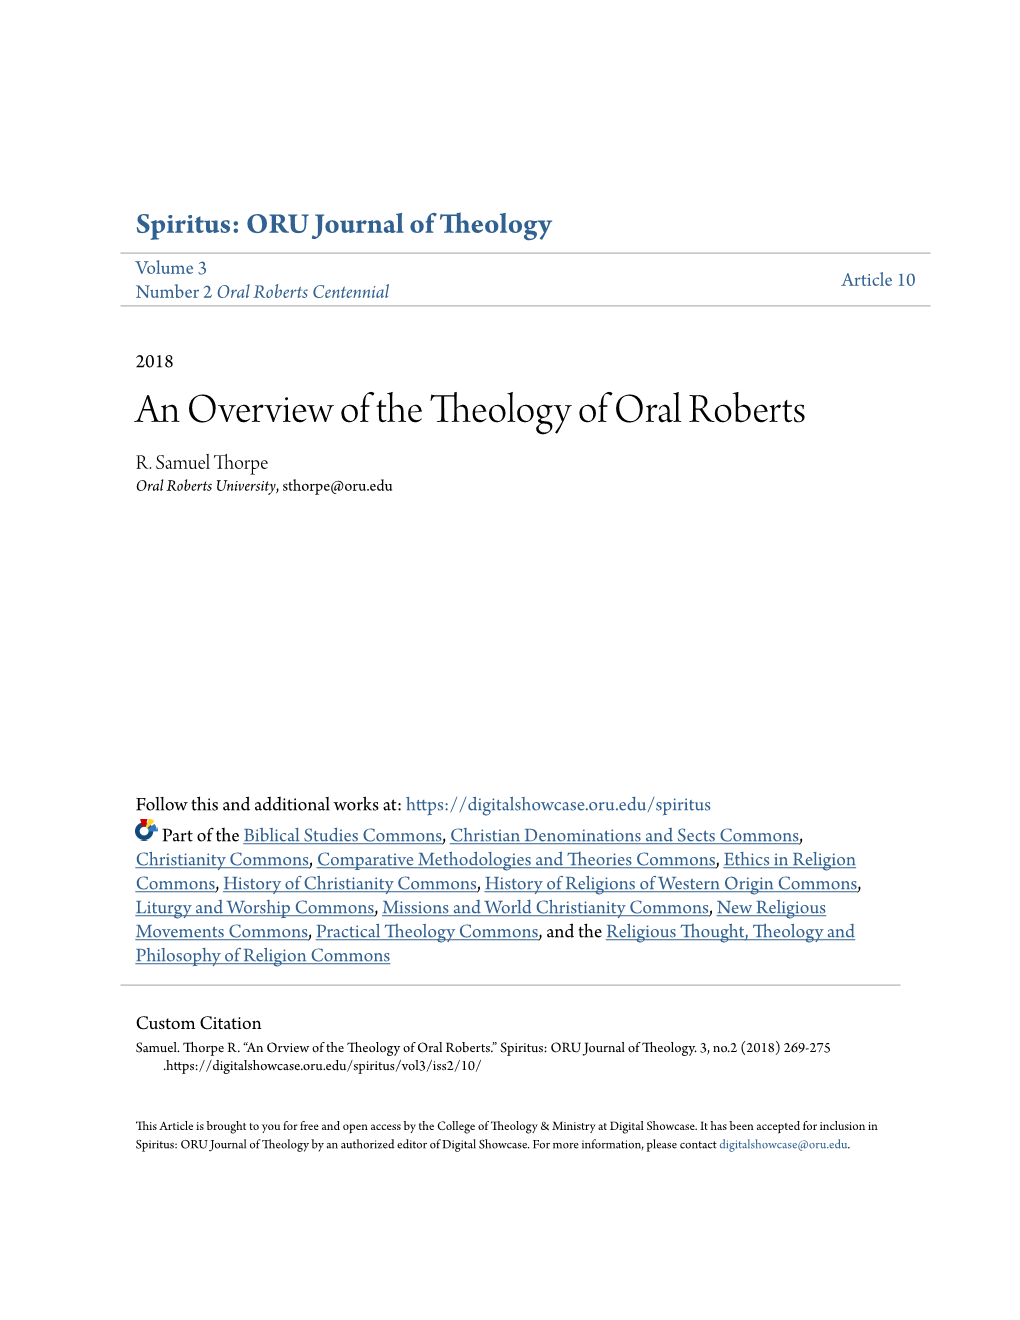 An Overview of the Theology of Oral Roberts R